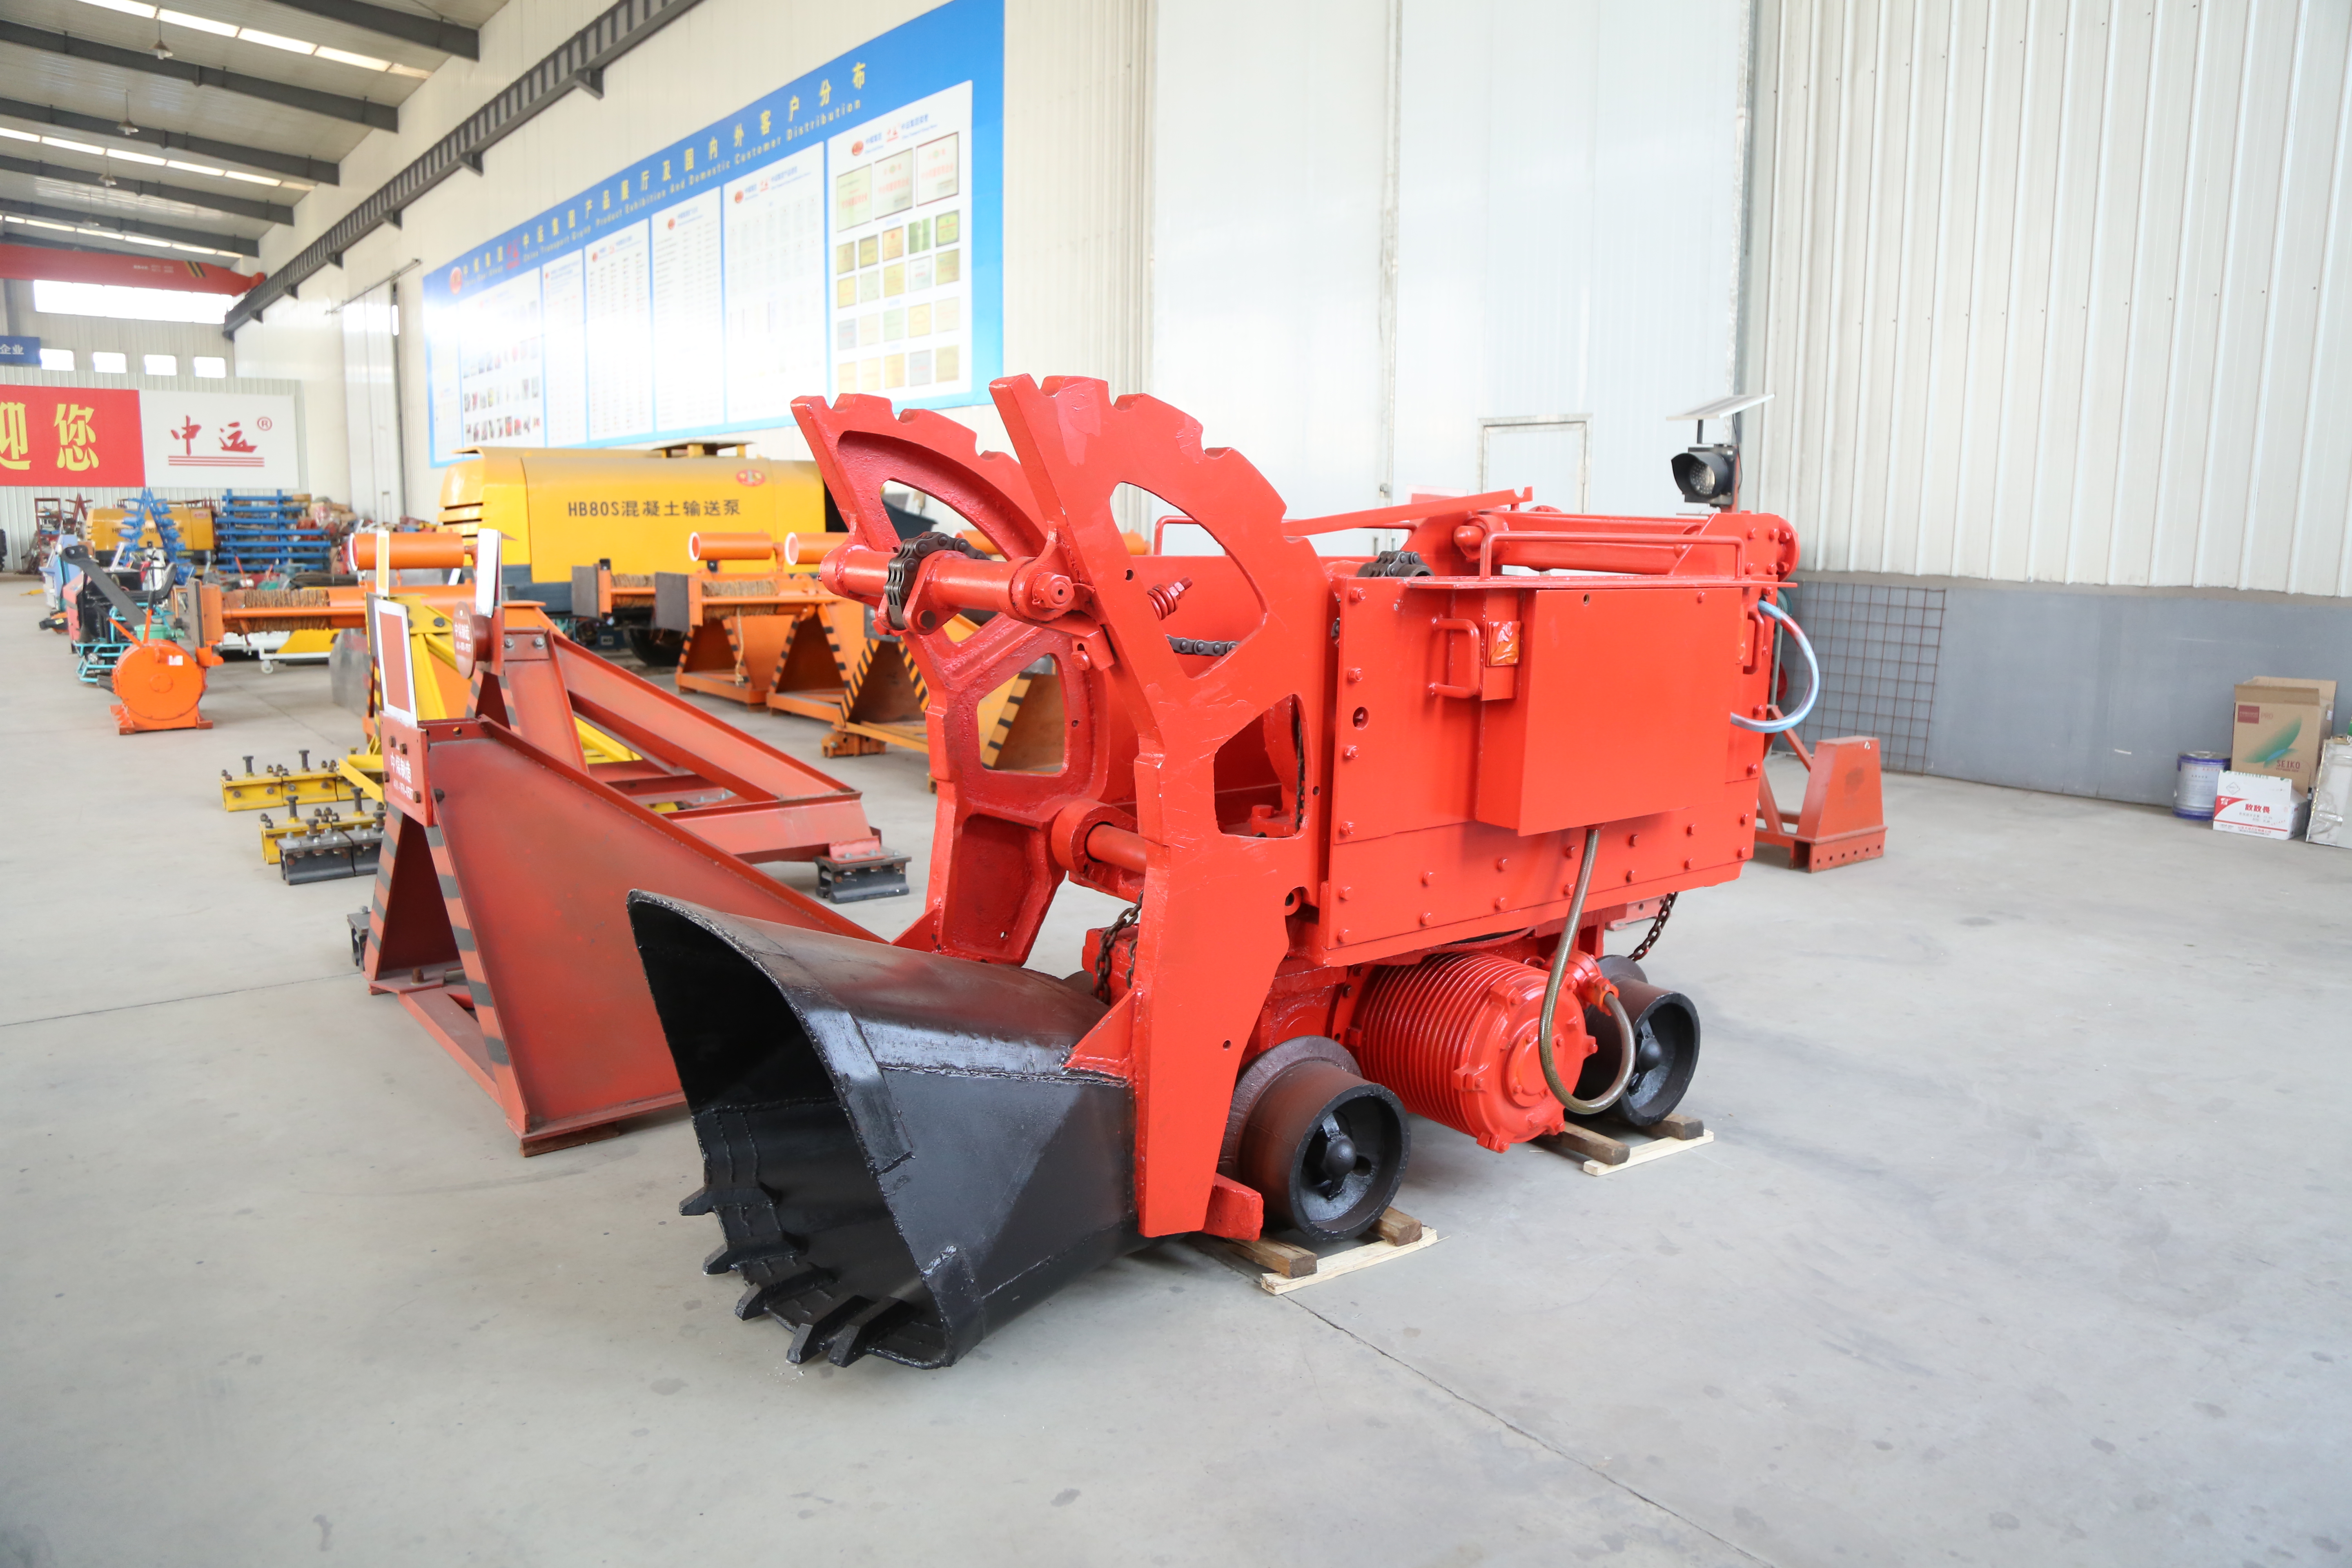 A Batch Of Tunnel Mucking Machine Of Sent To Shanxi Province